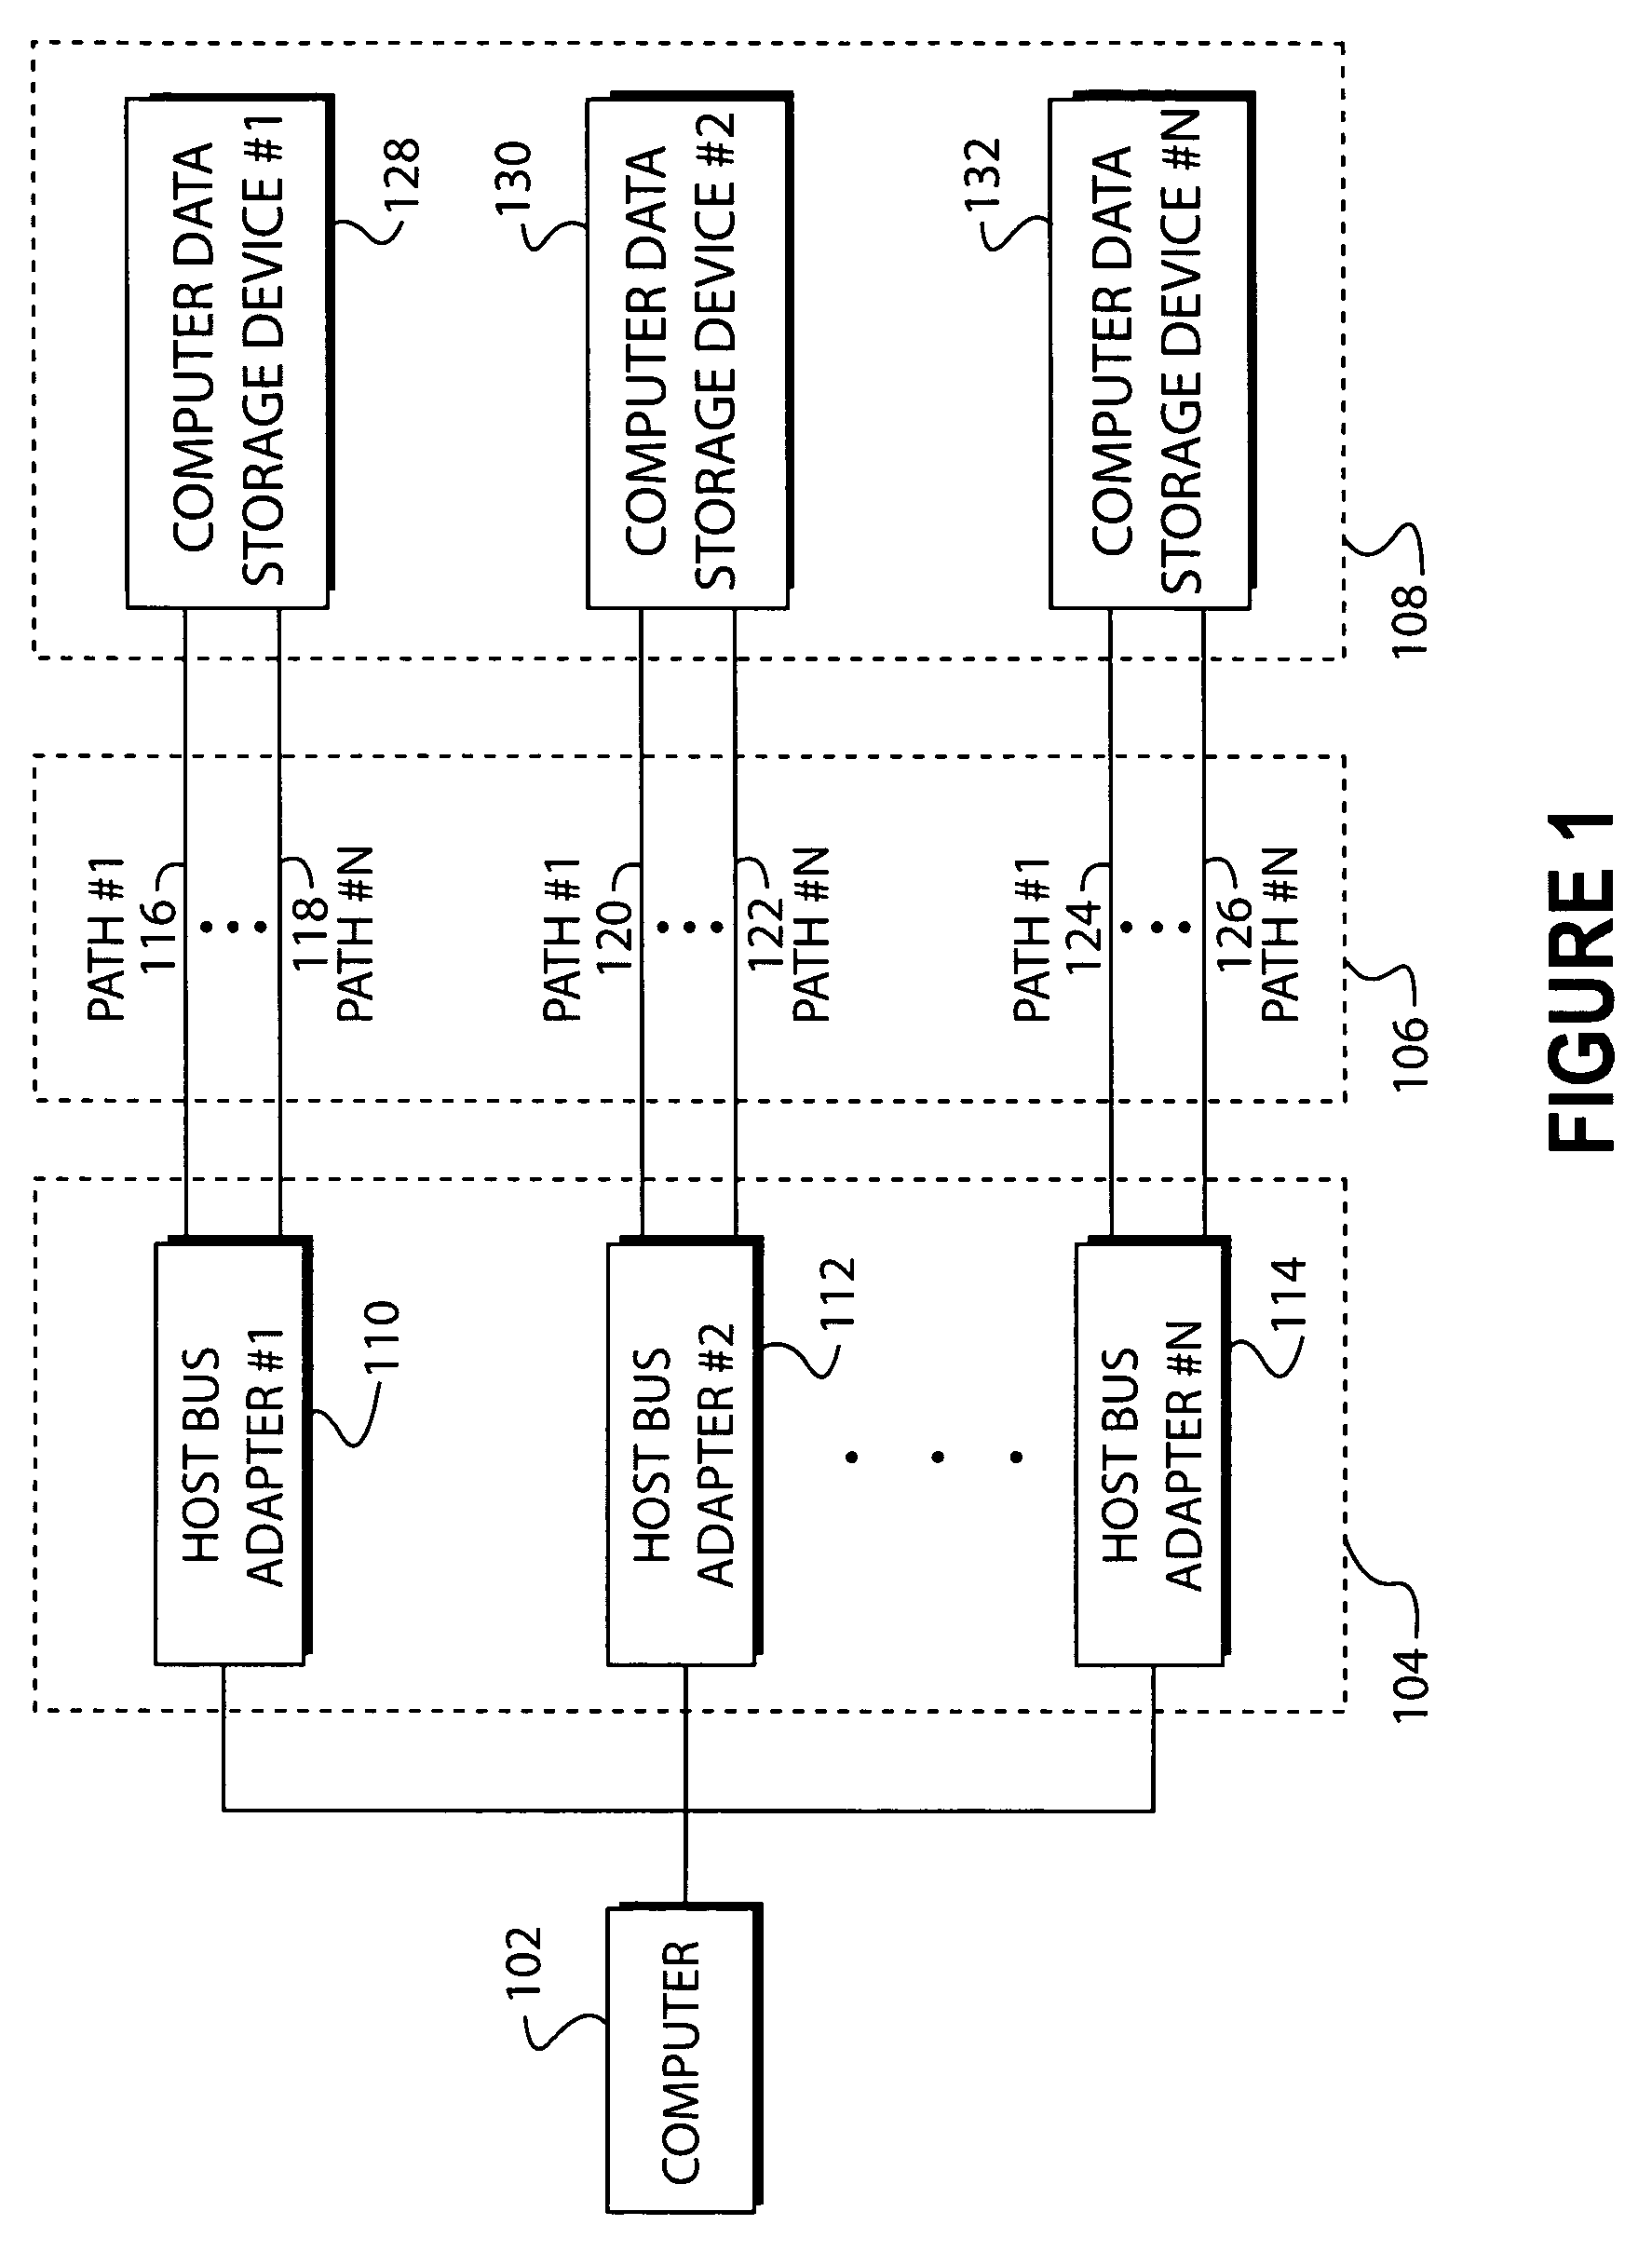 System and method of creating virtual data paths using a multiple-path driver